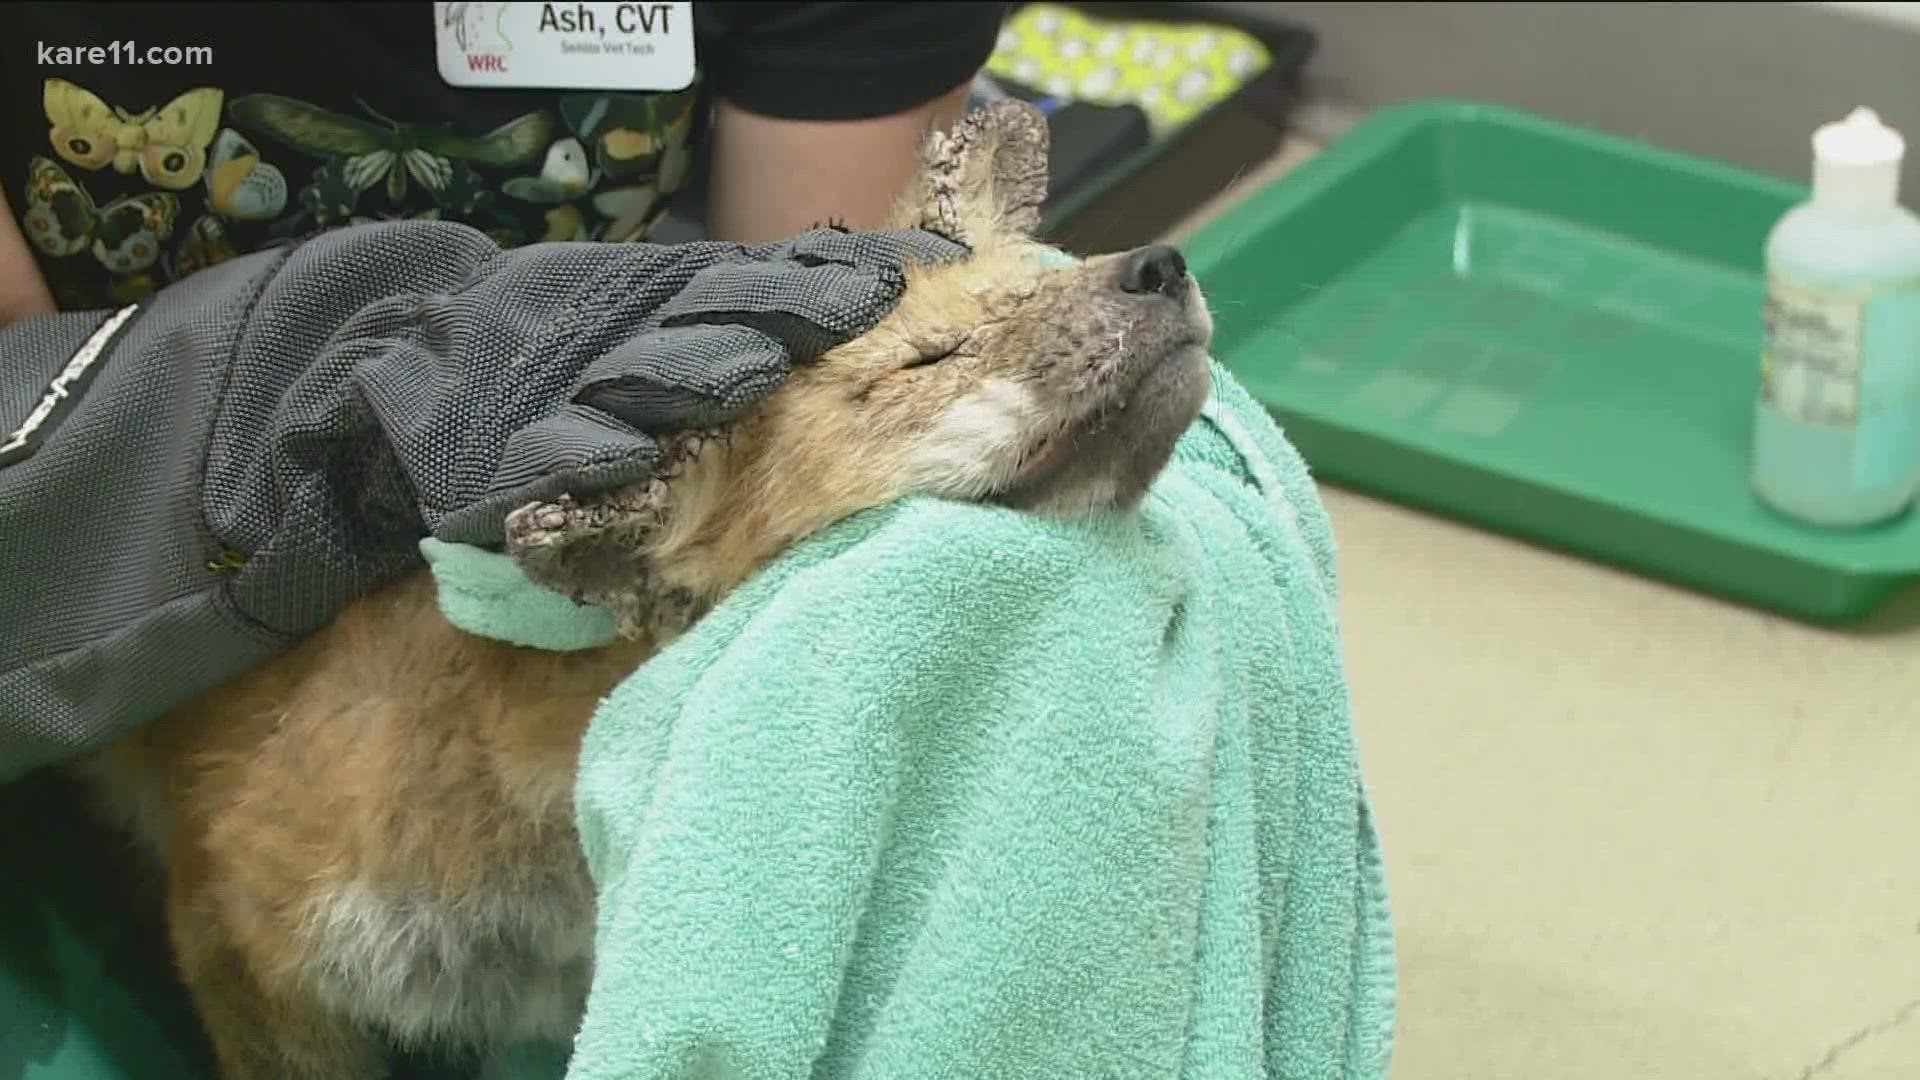 The Wildlife Rehabilitation Center says it will teach people how to successfully trap and feed a sick fox.